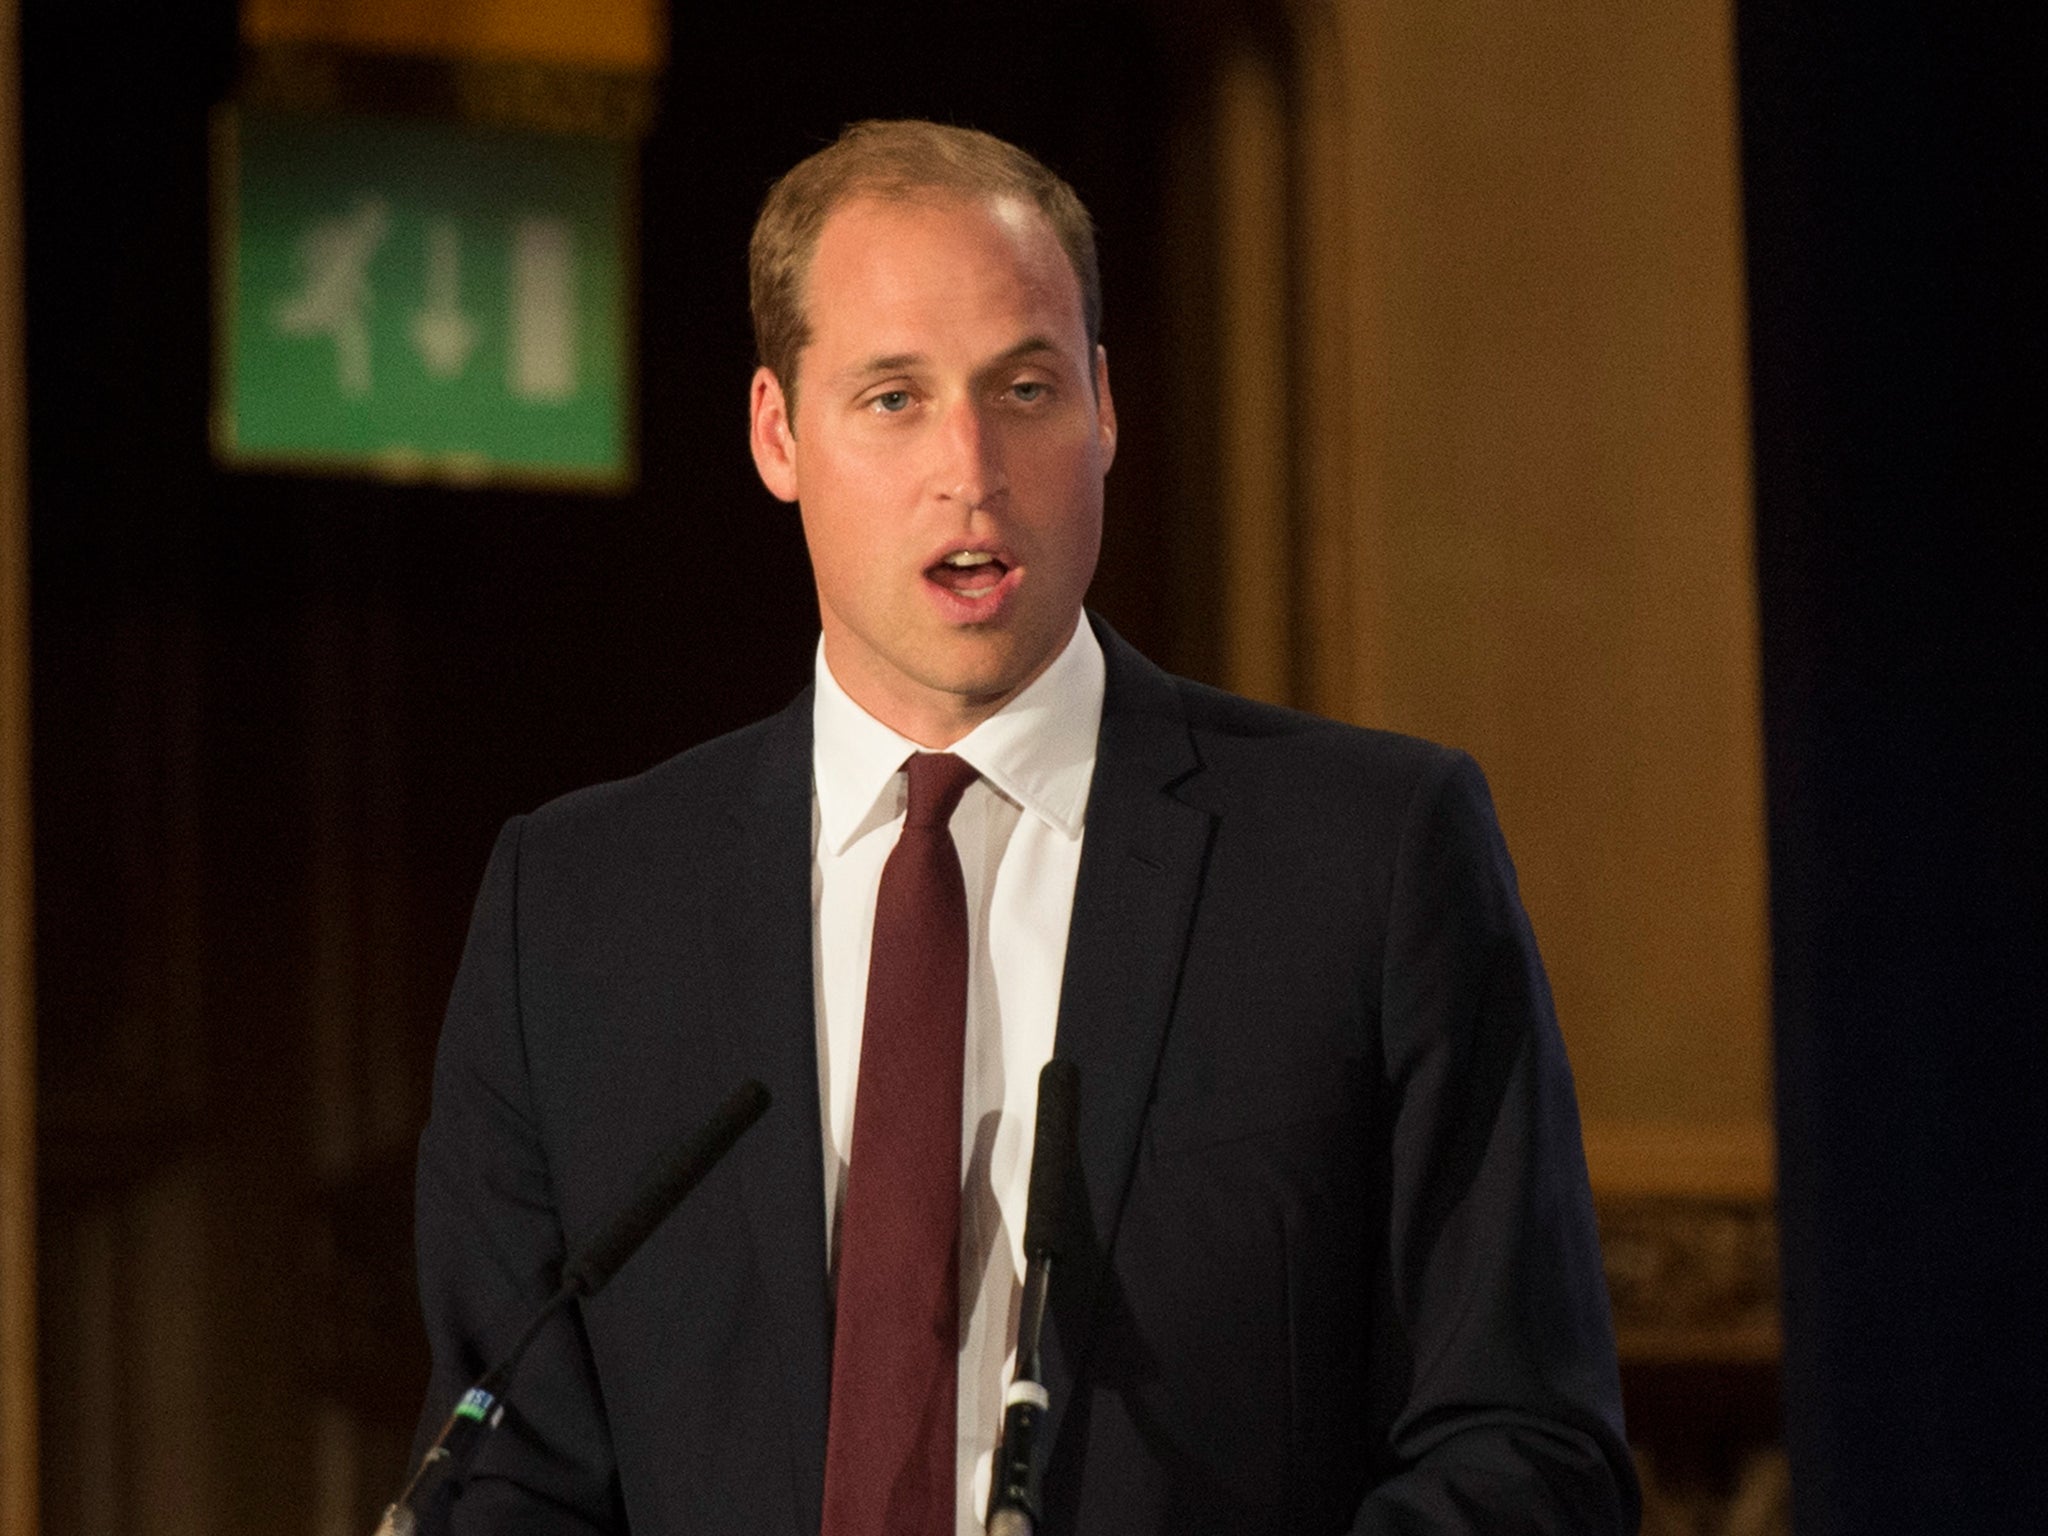 The Duke of Cambridge is urging governments and business leaders to take action to prevent the extinction of “iconic” animals such as elephants and rhinos